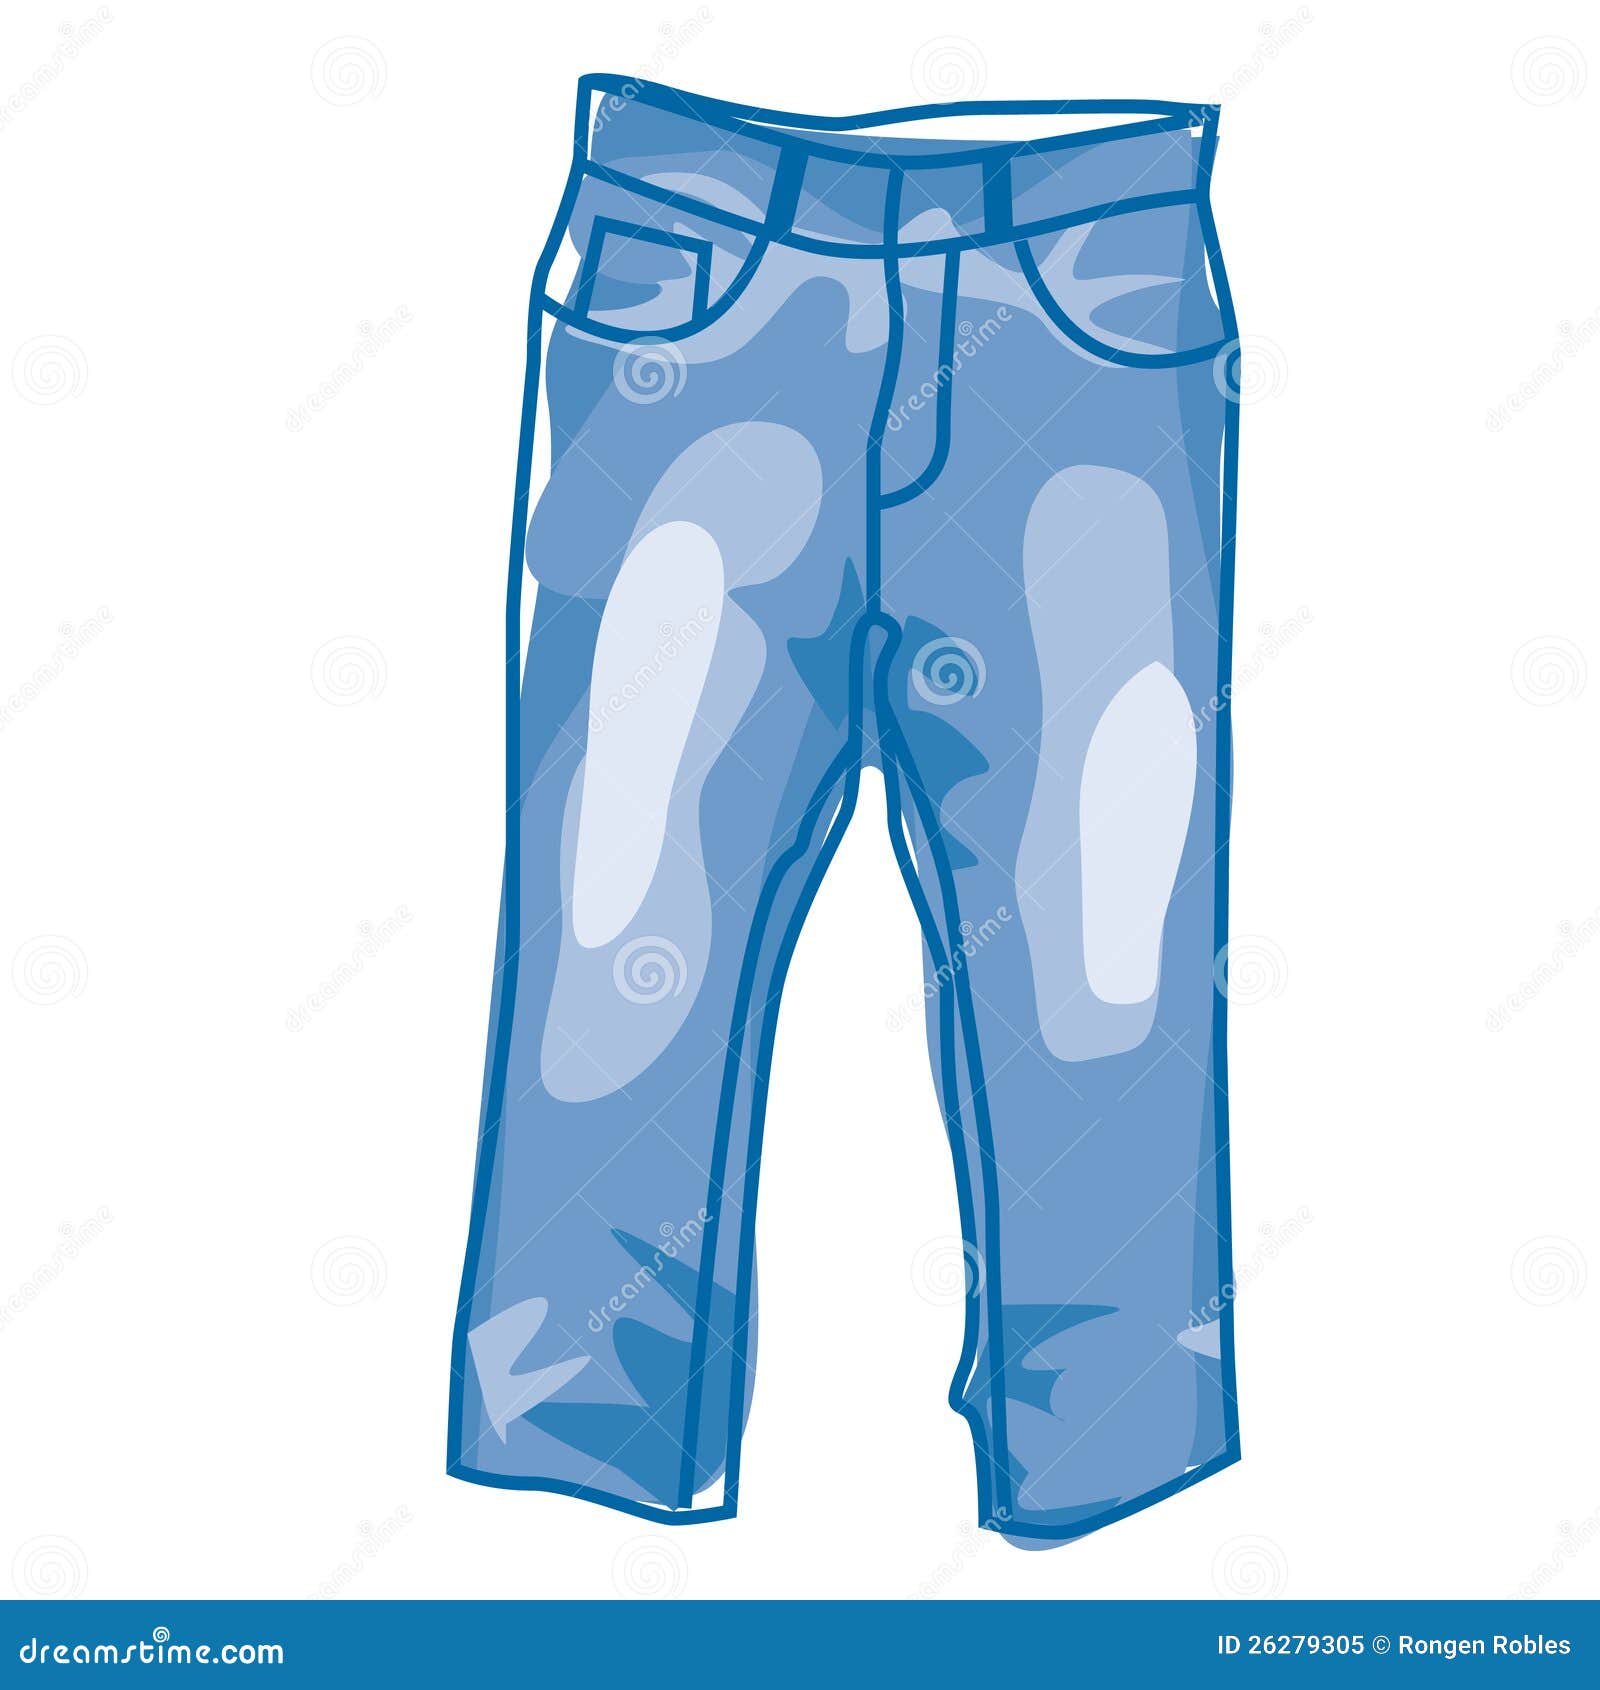 ripped jeans clipart - photo #32